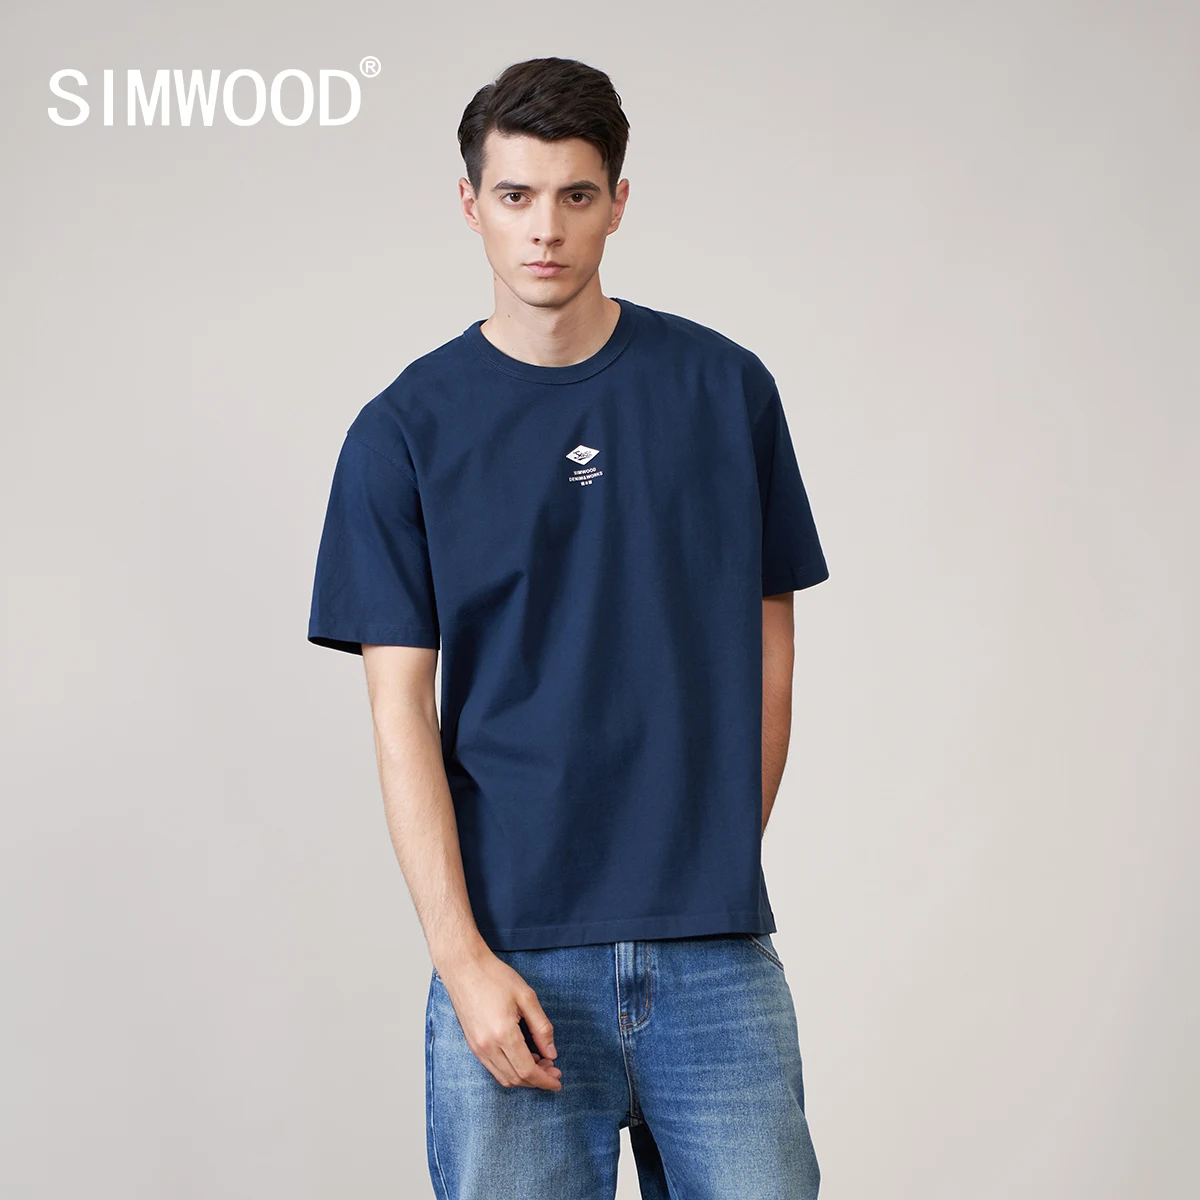 SIMWOOD 2022 Spring Summer New Oversize Heavyweight 100% Cotton T-shirts Men Letter Print Tops Durable Three Stitches Tees